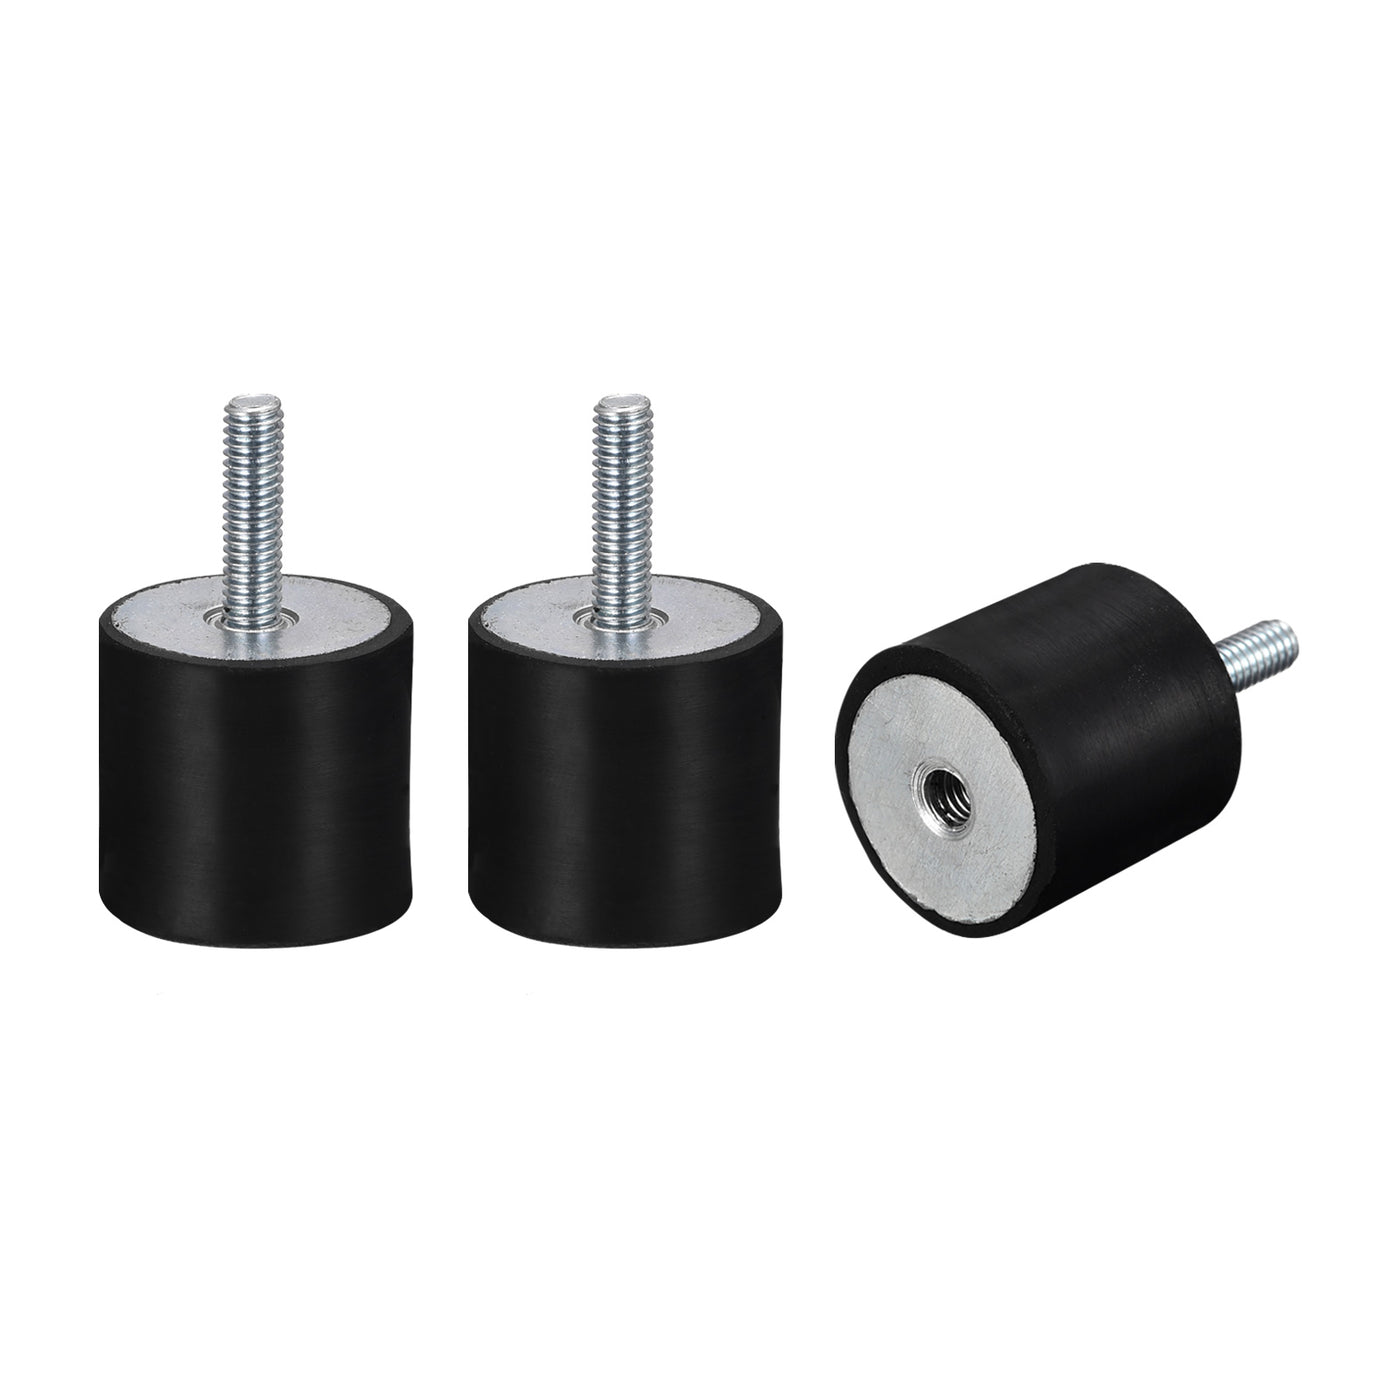 uxcell Uxcell Rubber Mount 3pcs M5 Male/Female Vibration Isolator Shock Absorber, D20mmxH15mm